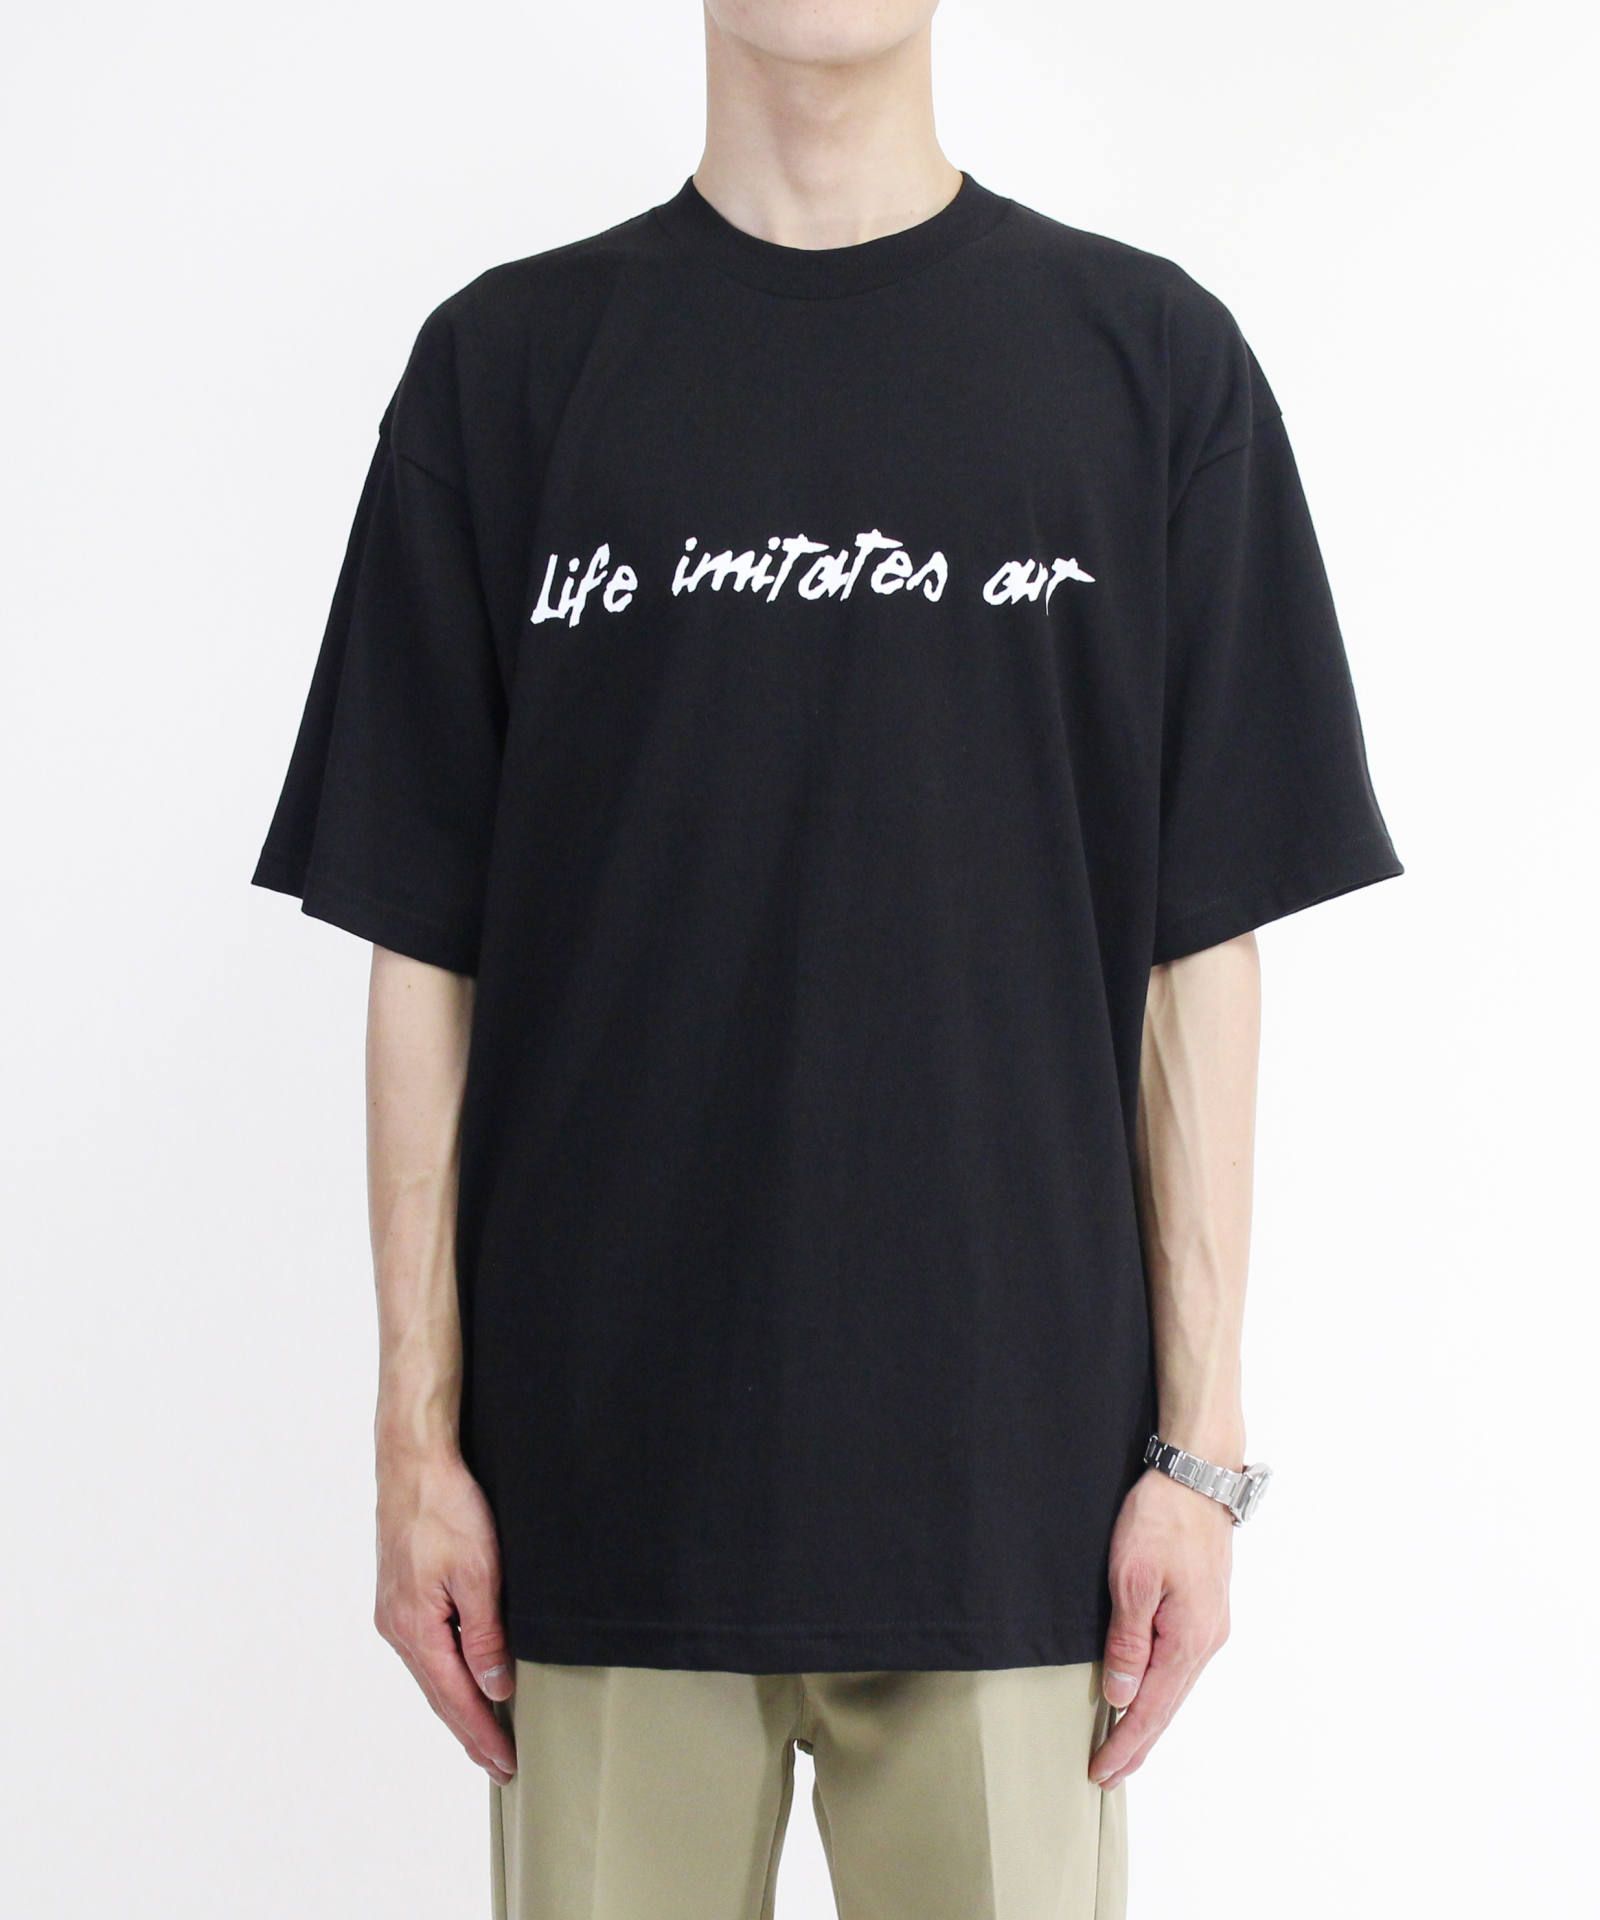 CLANE HOMME - メンズプリントTシャツ - BRUSH WRITING T/S - BLACK